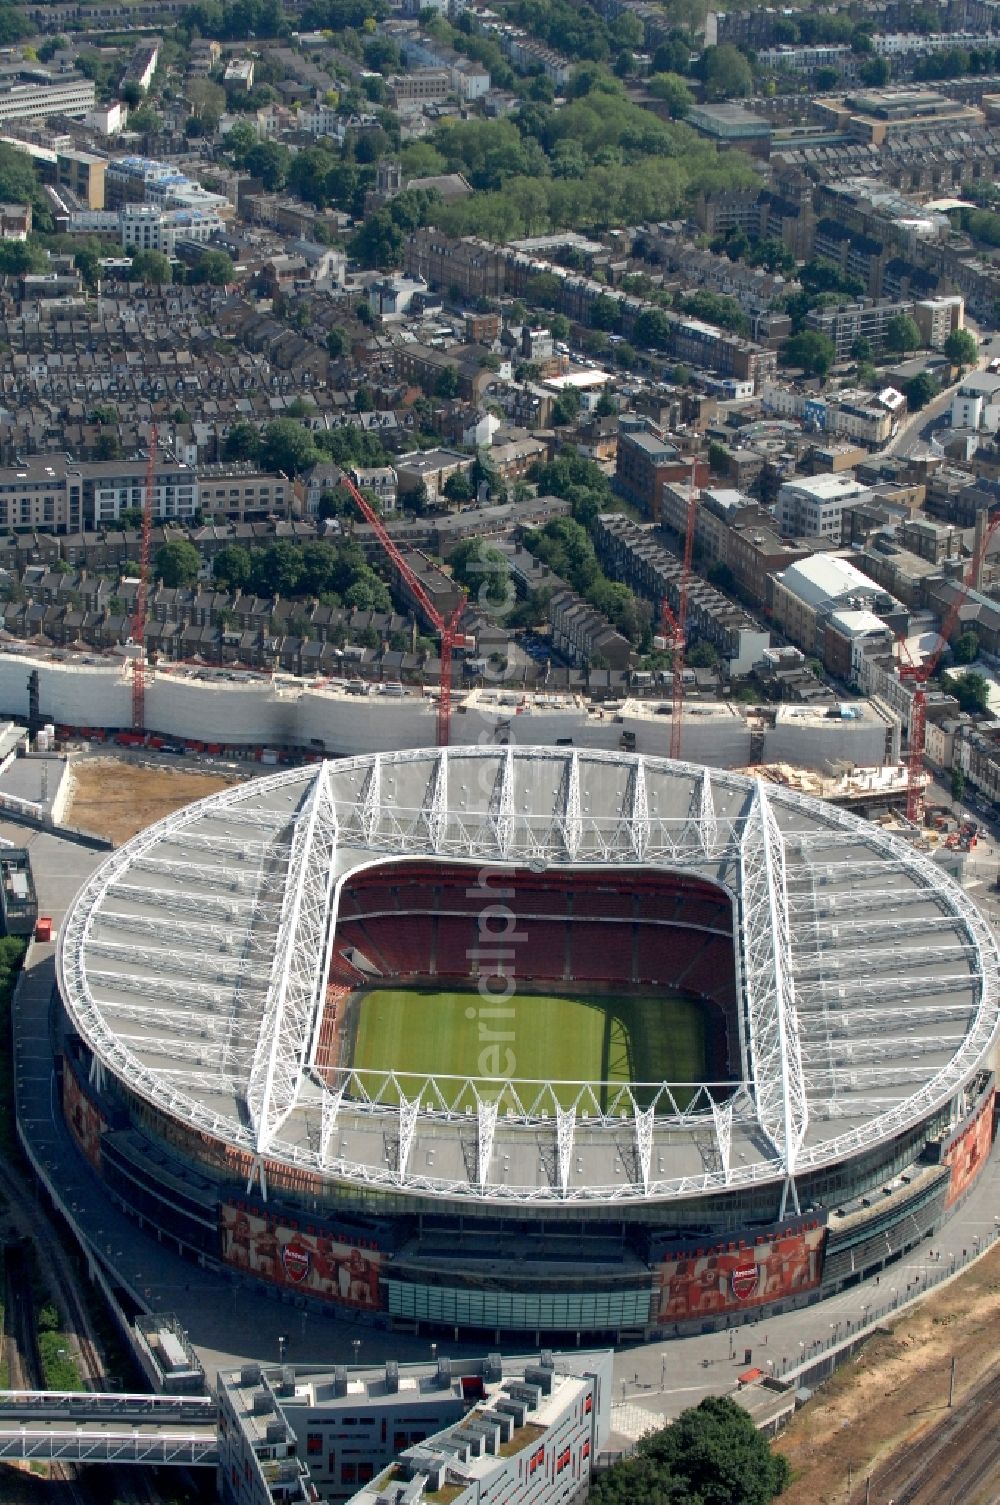 London from the bird's eye view: Sports facility grounds of the Arena stadium Emirates Stadium of Premier League on Hornsey Rd in London in England, United Kingdom